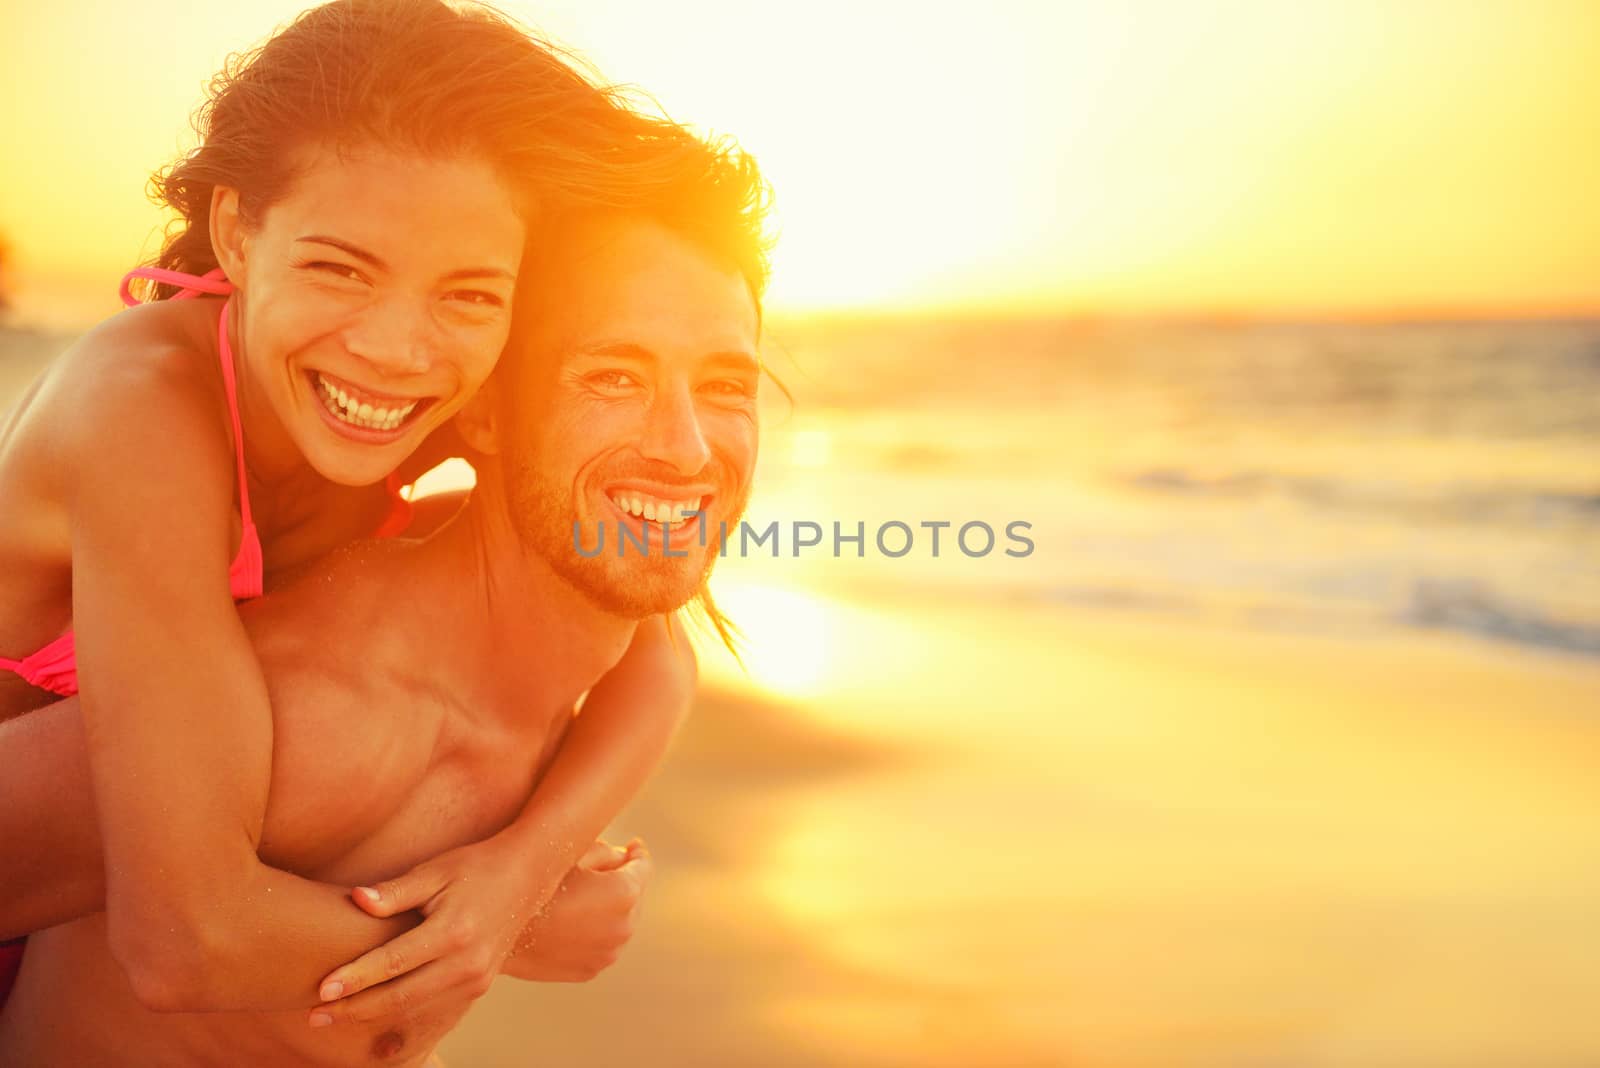 Lovers couple in love having fun dating on beach portrait. Beautiful healthy young adults girlfriend piggybacking on boyfriend hugging happy. Multiracial dating or healthy relationship concept.